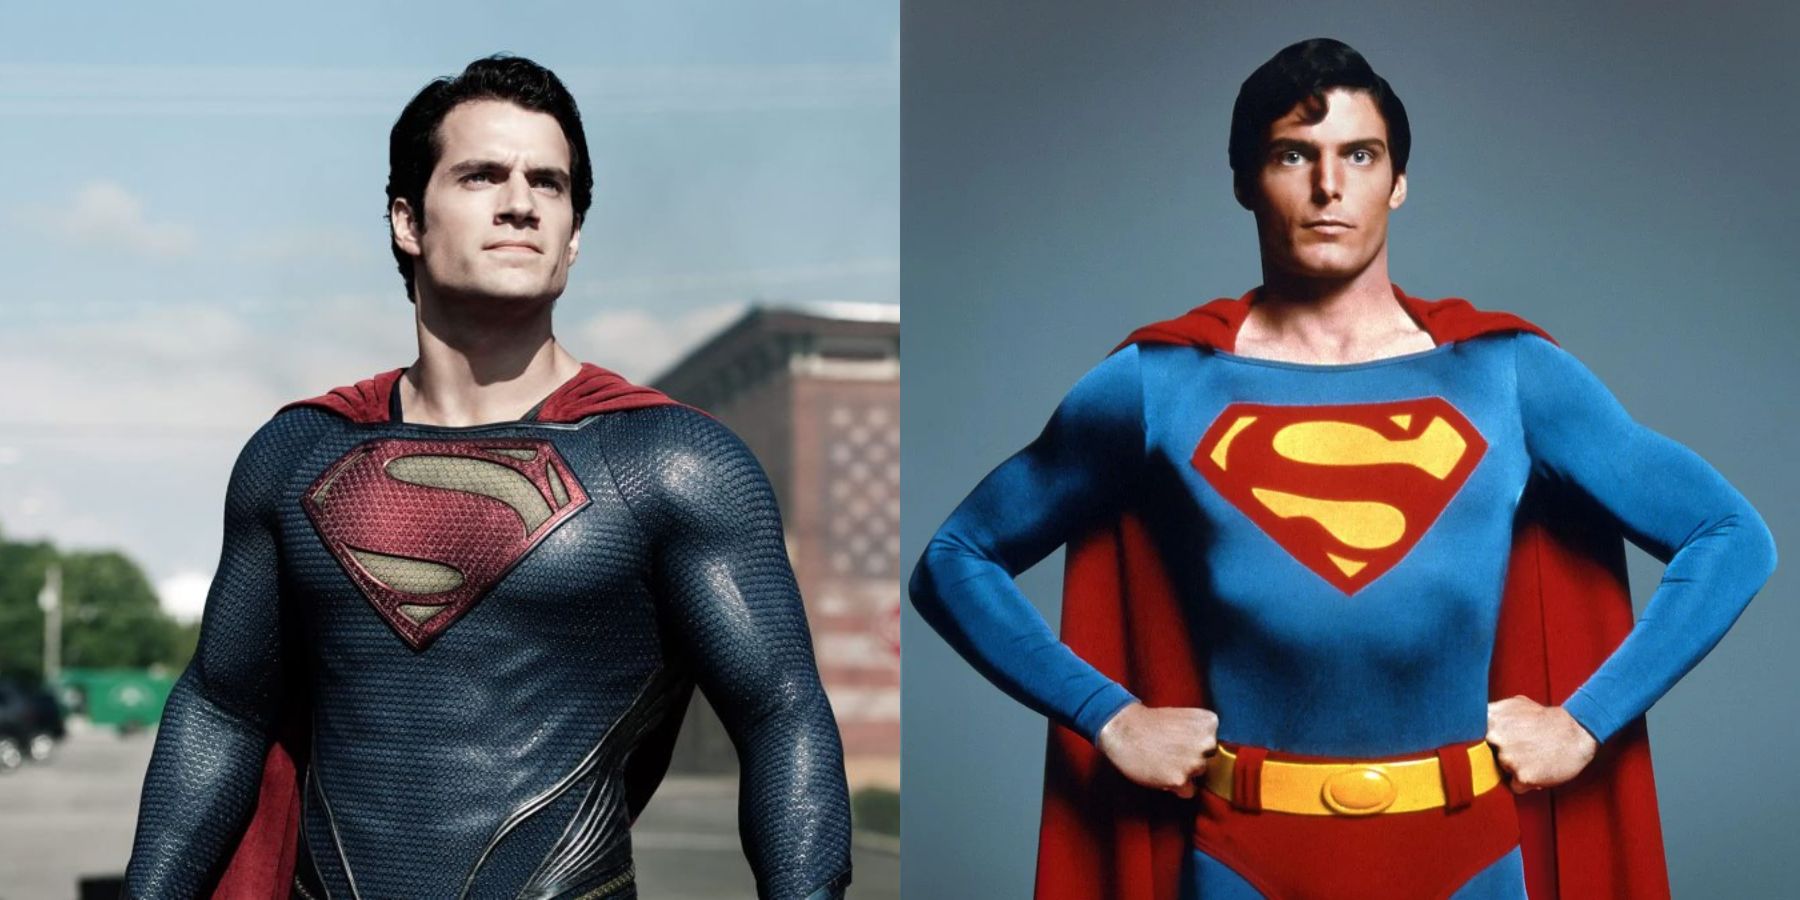 New Image Of Henry Cavill in Christopher Reeve's Superman Suit For